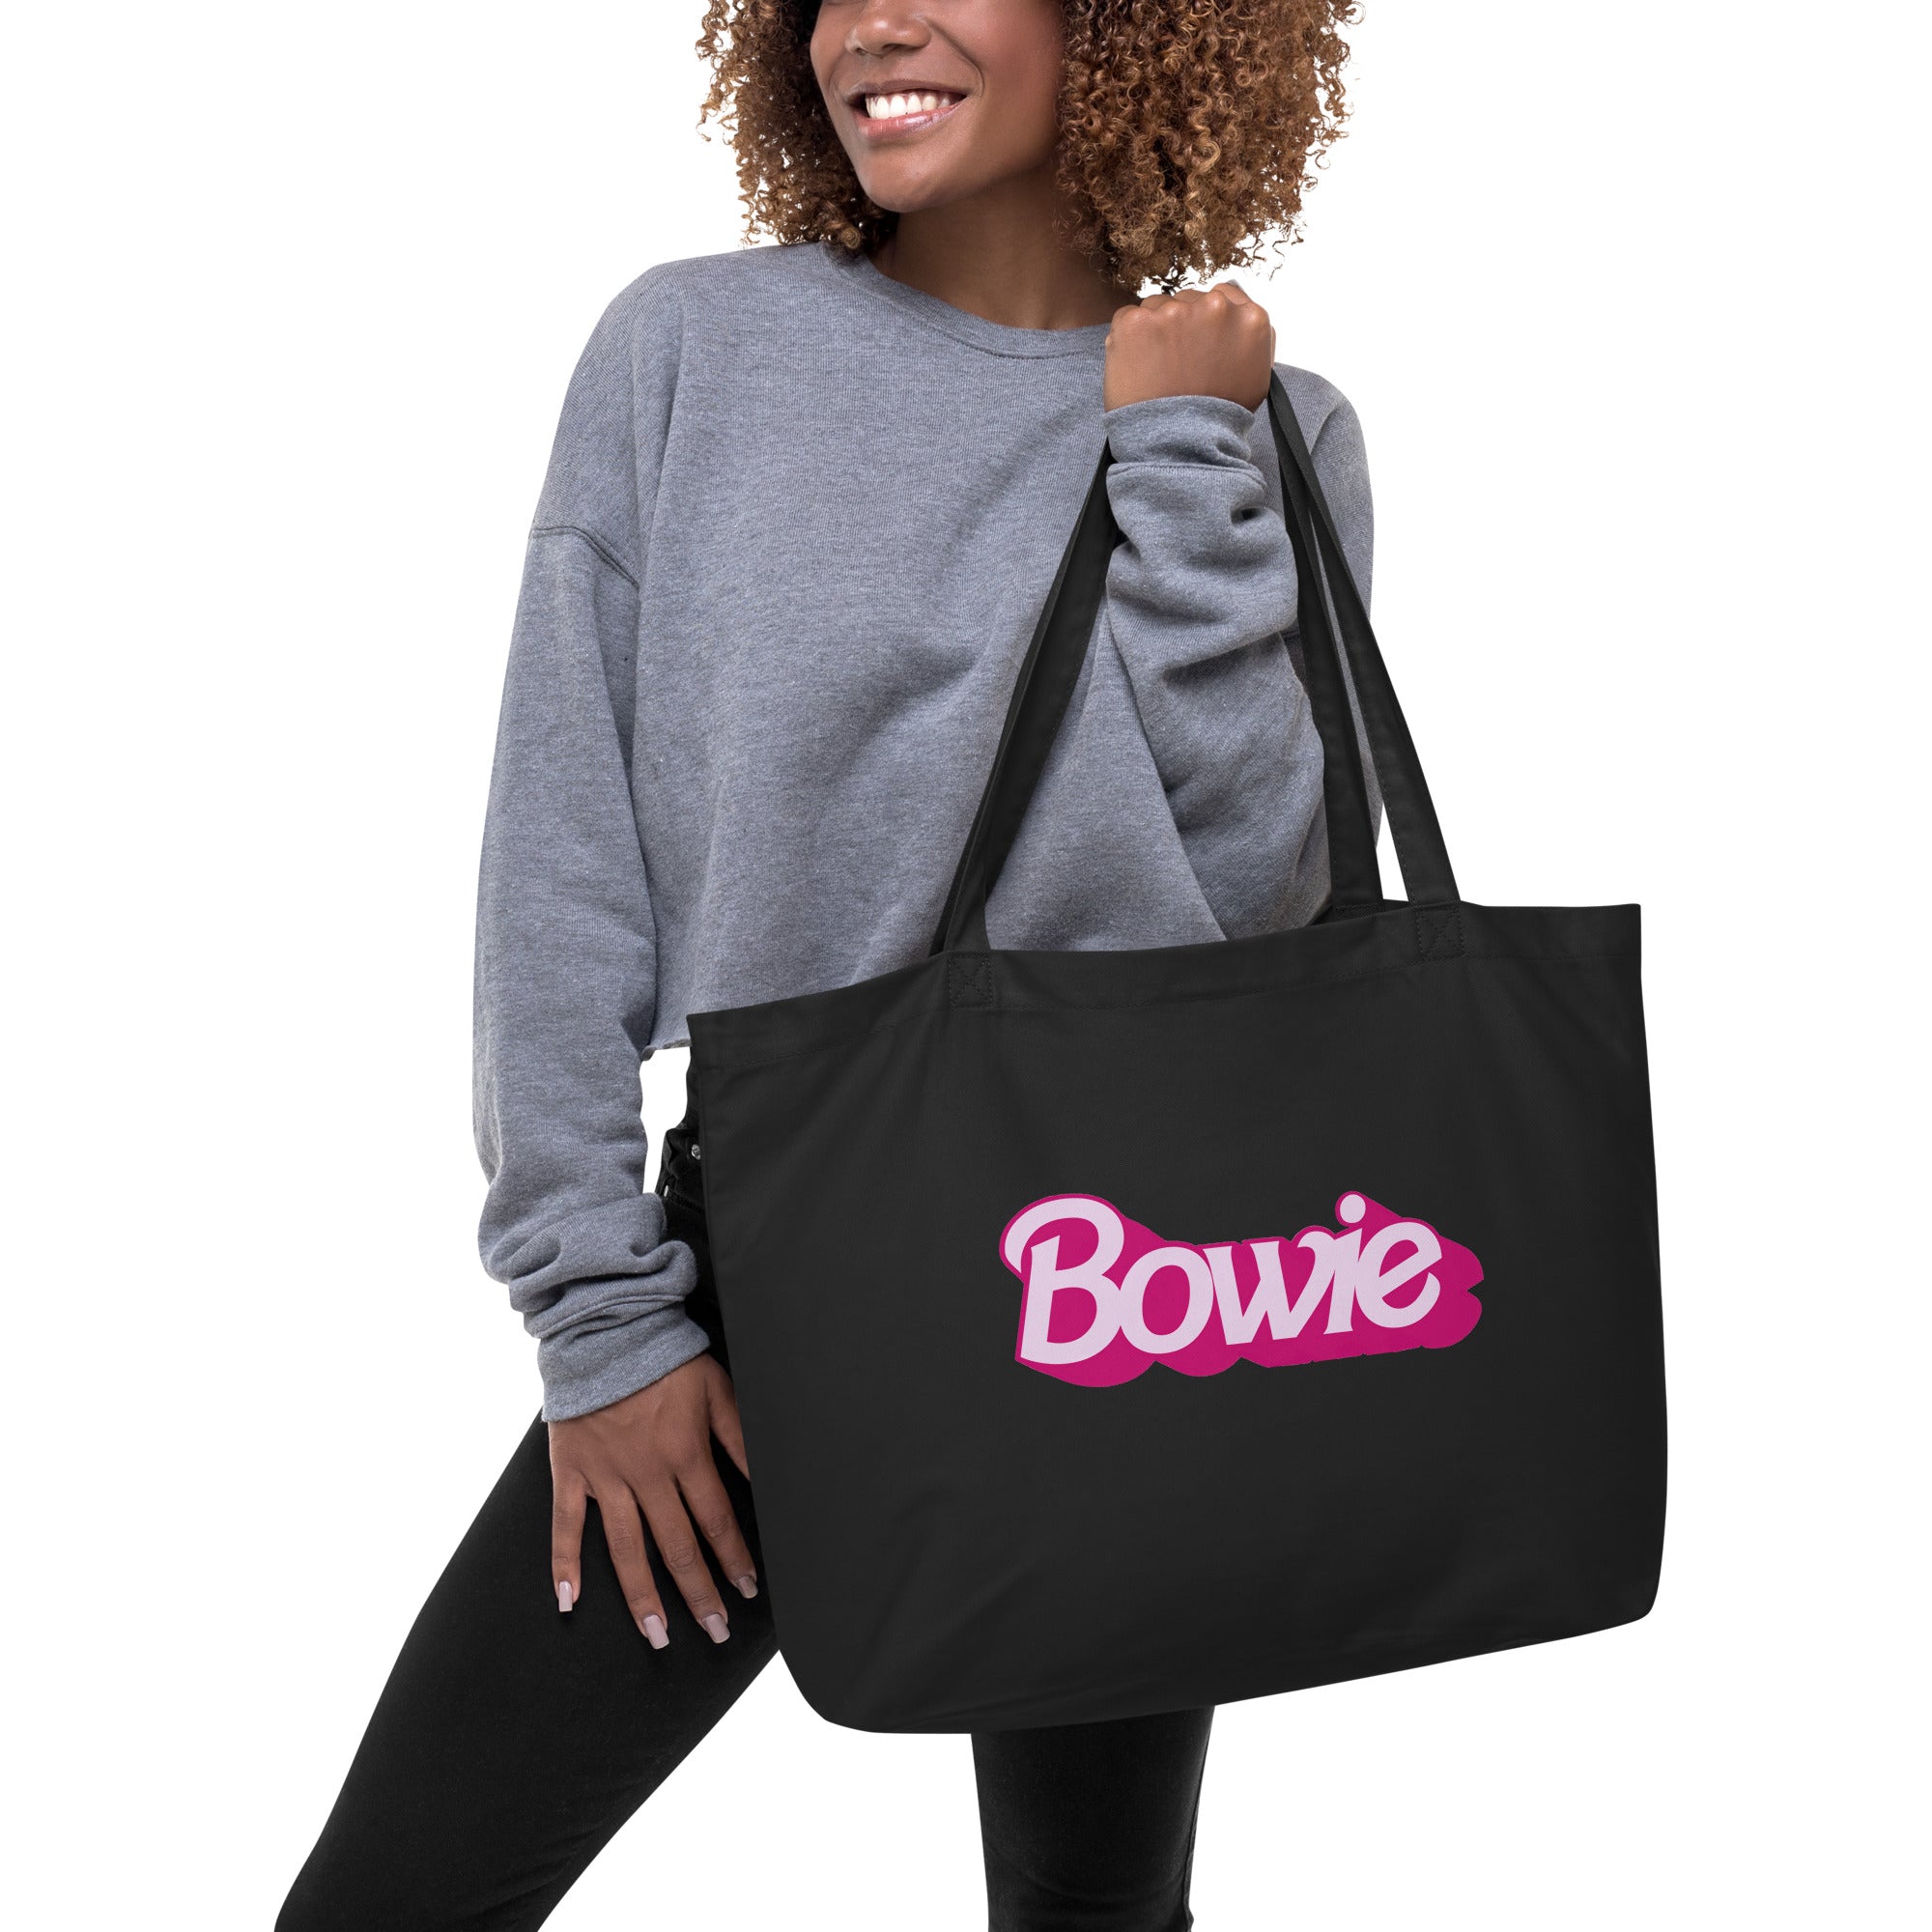 Bowie (famous doll font) printed Large organic tote bag